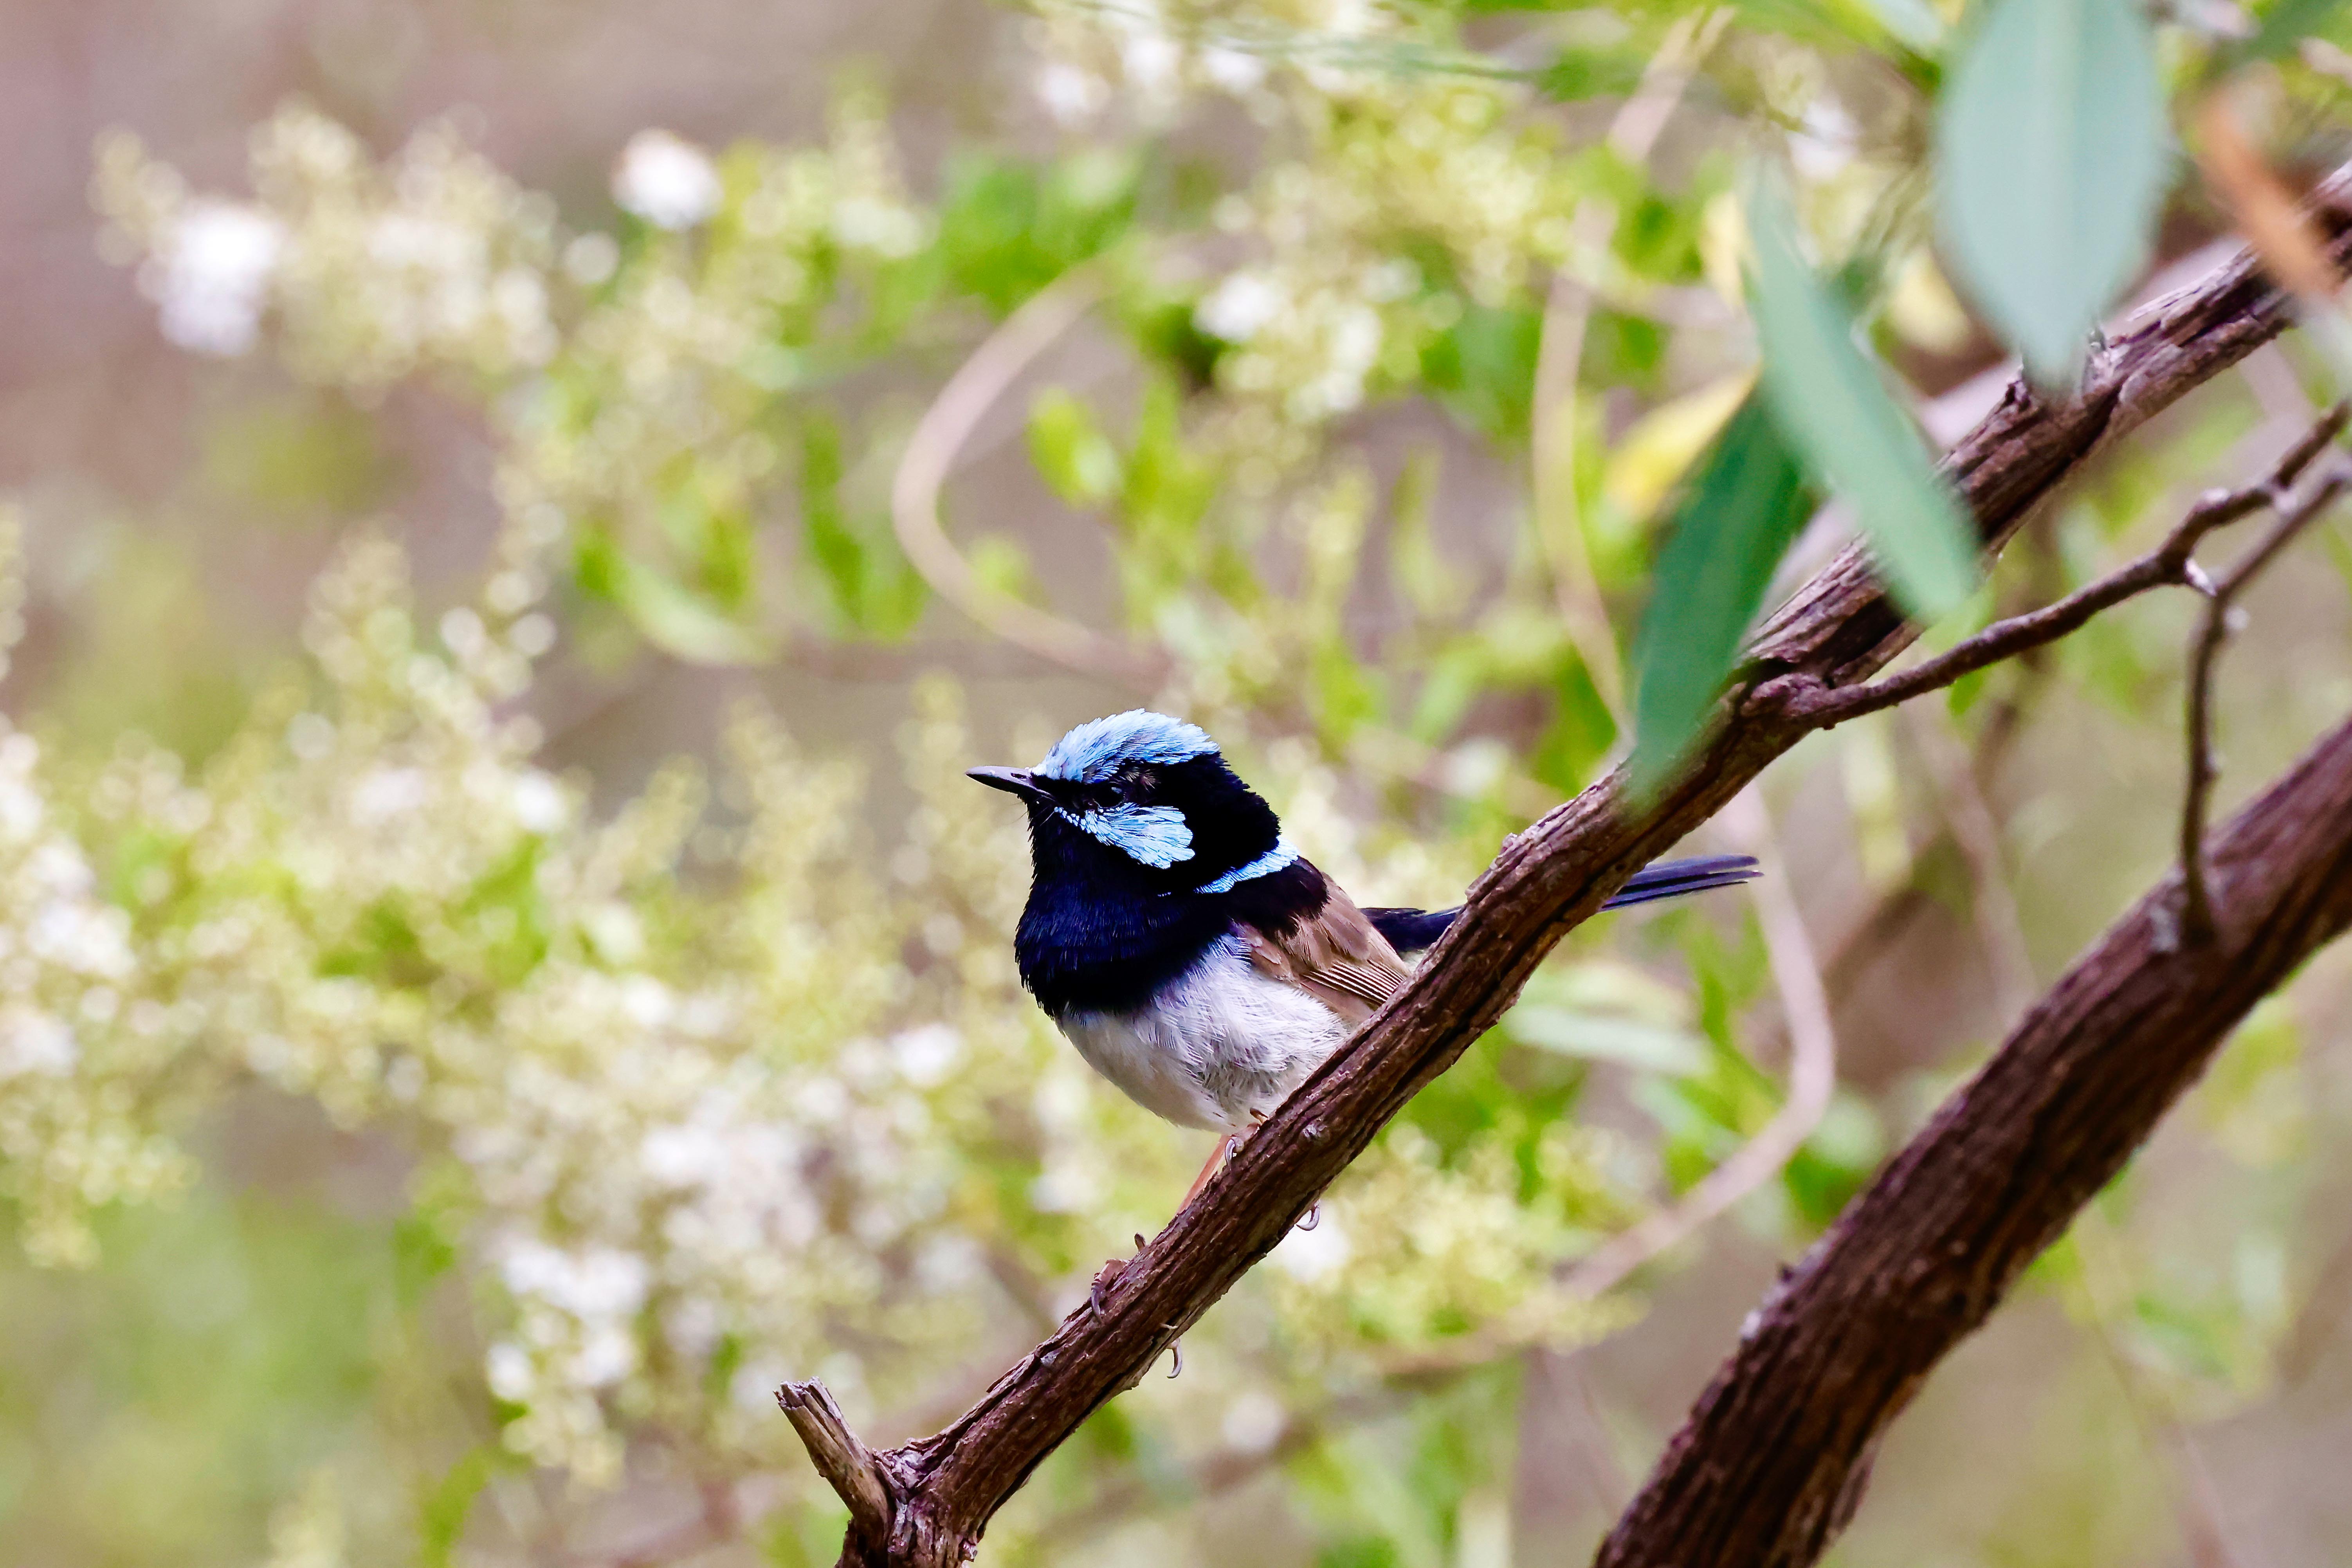 A magnificent fairy wren perched on a branch